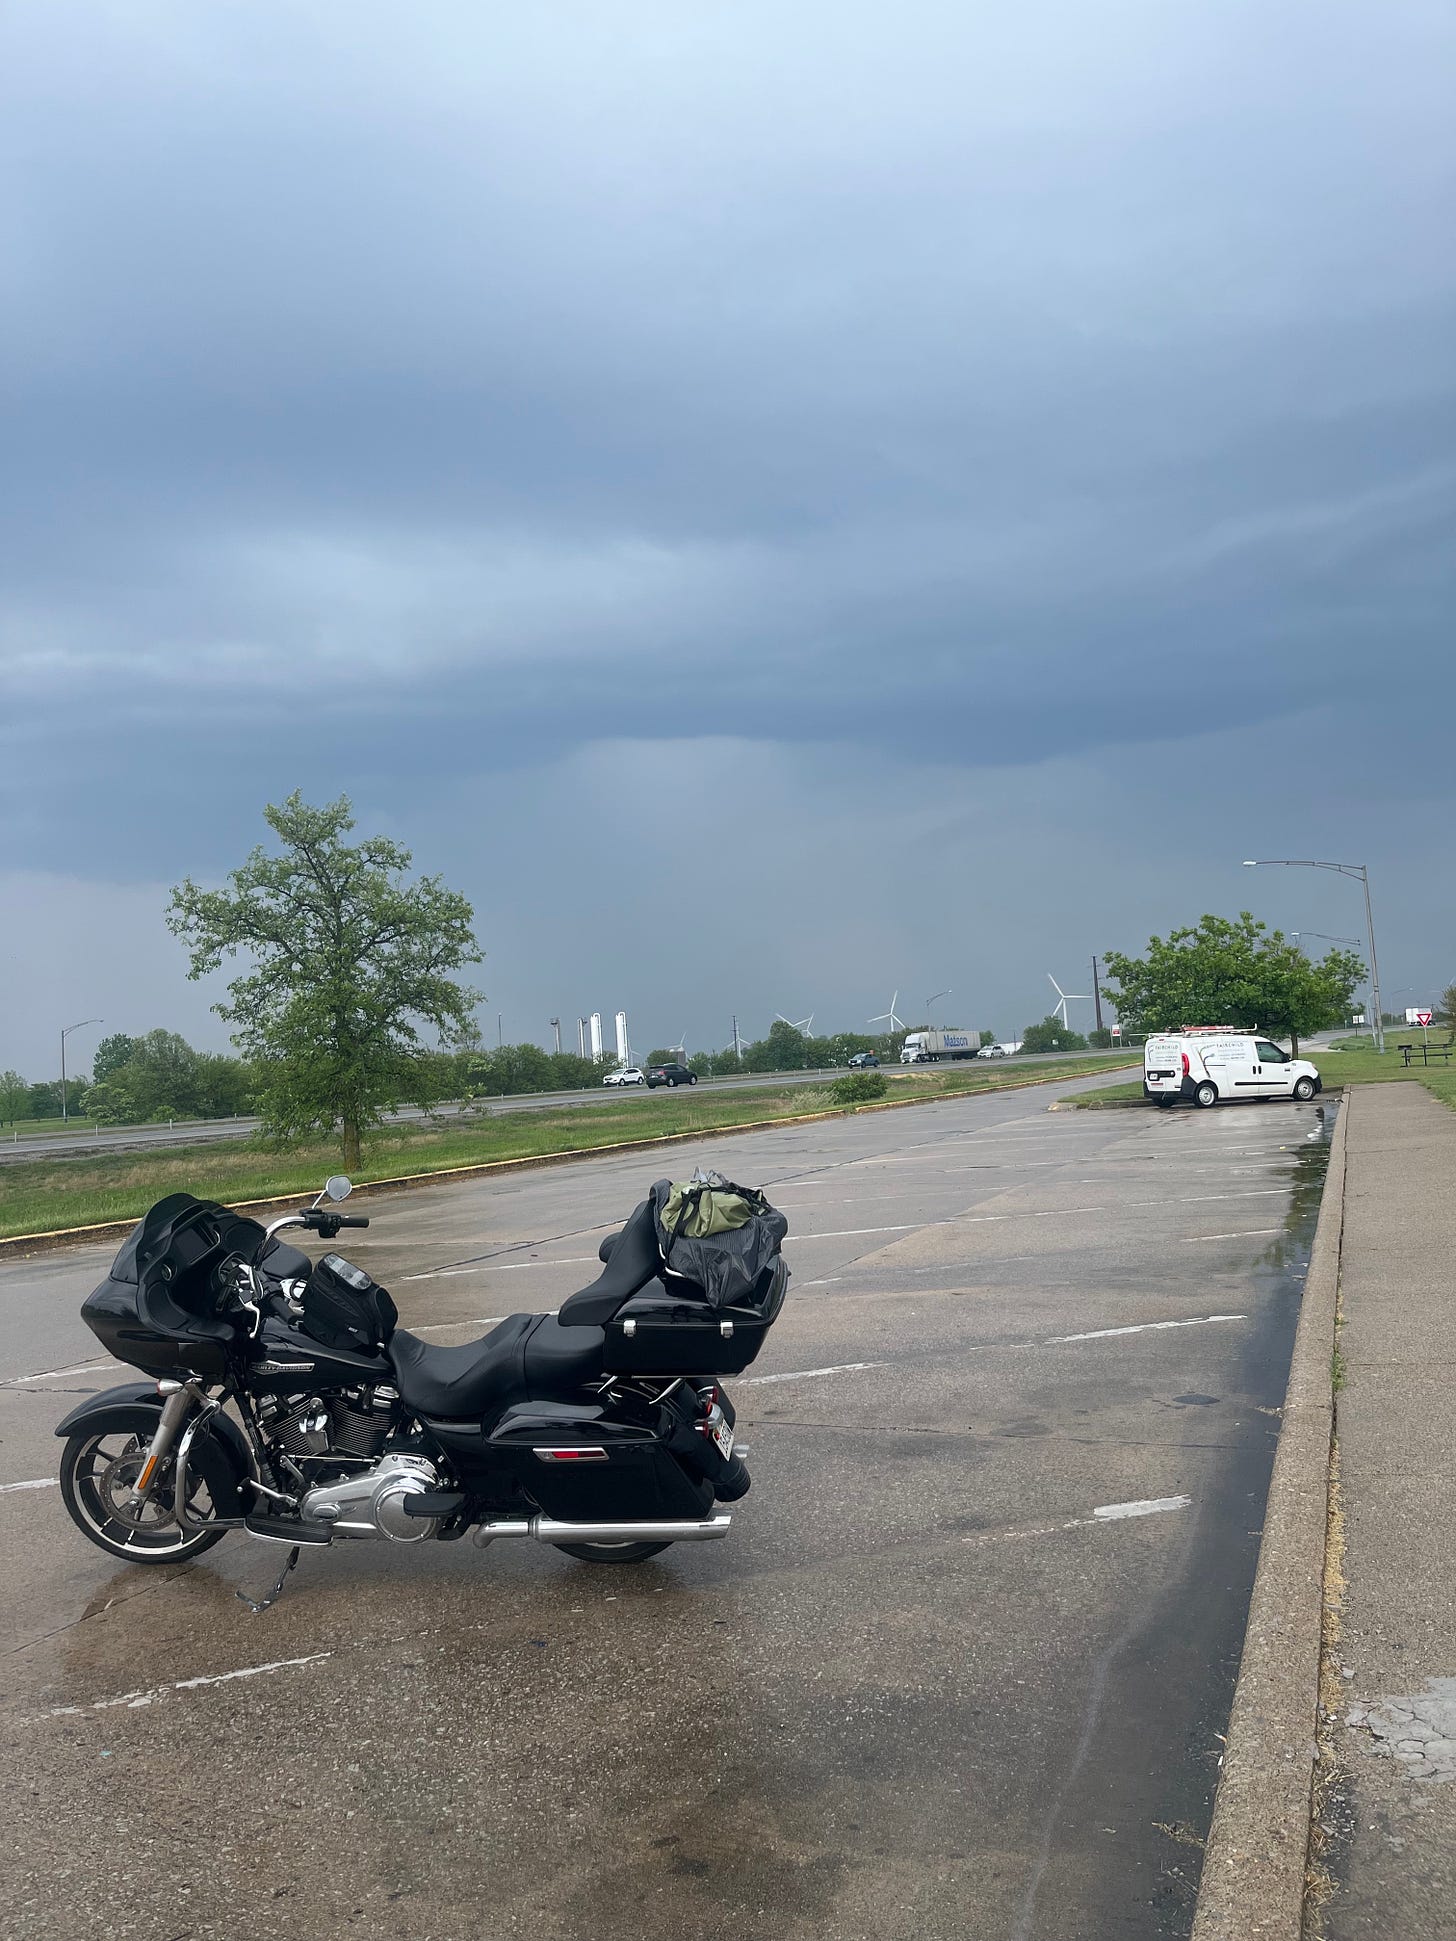 The motorcycle parked in a parking lot off the freeway with a cloudy and dark sky overhead. 